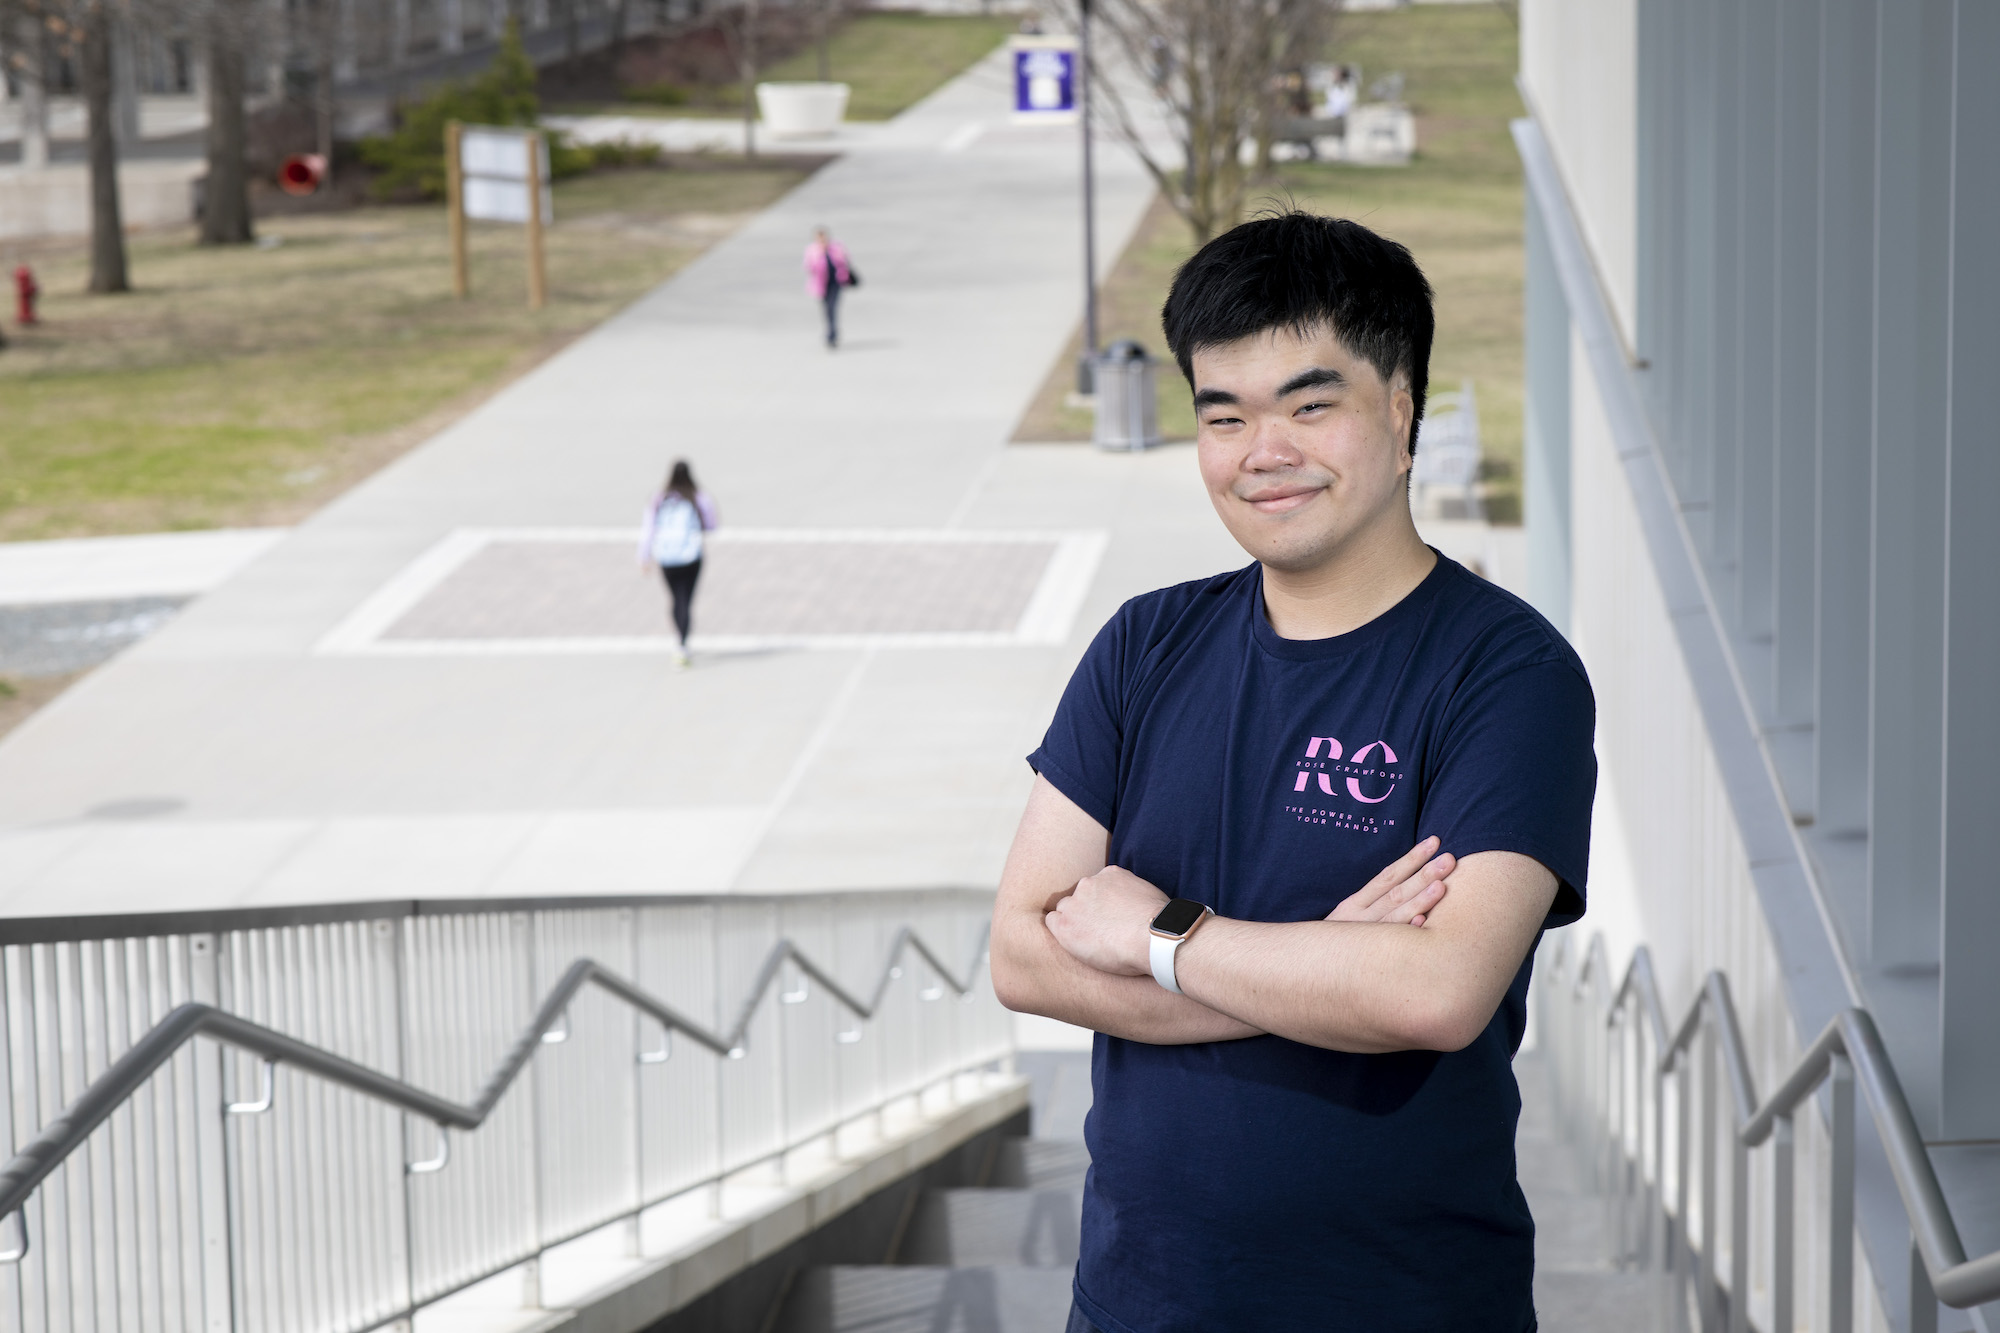 A man with short black hair smiles, arms crossed in front of his chest, as he poses for a portrait on a set of stairs on the UAlbany campus. Students can be seen walking in the background.